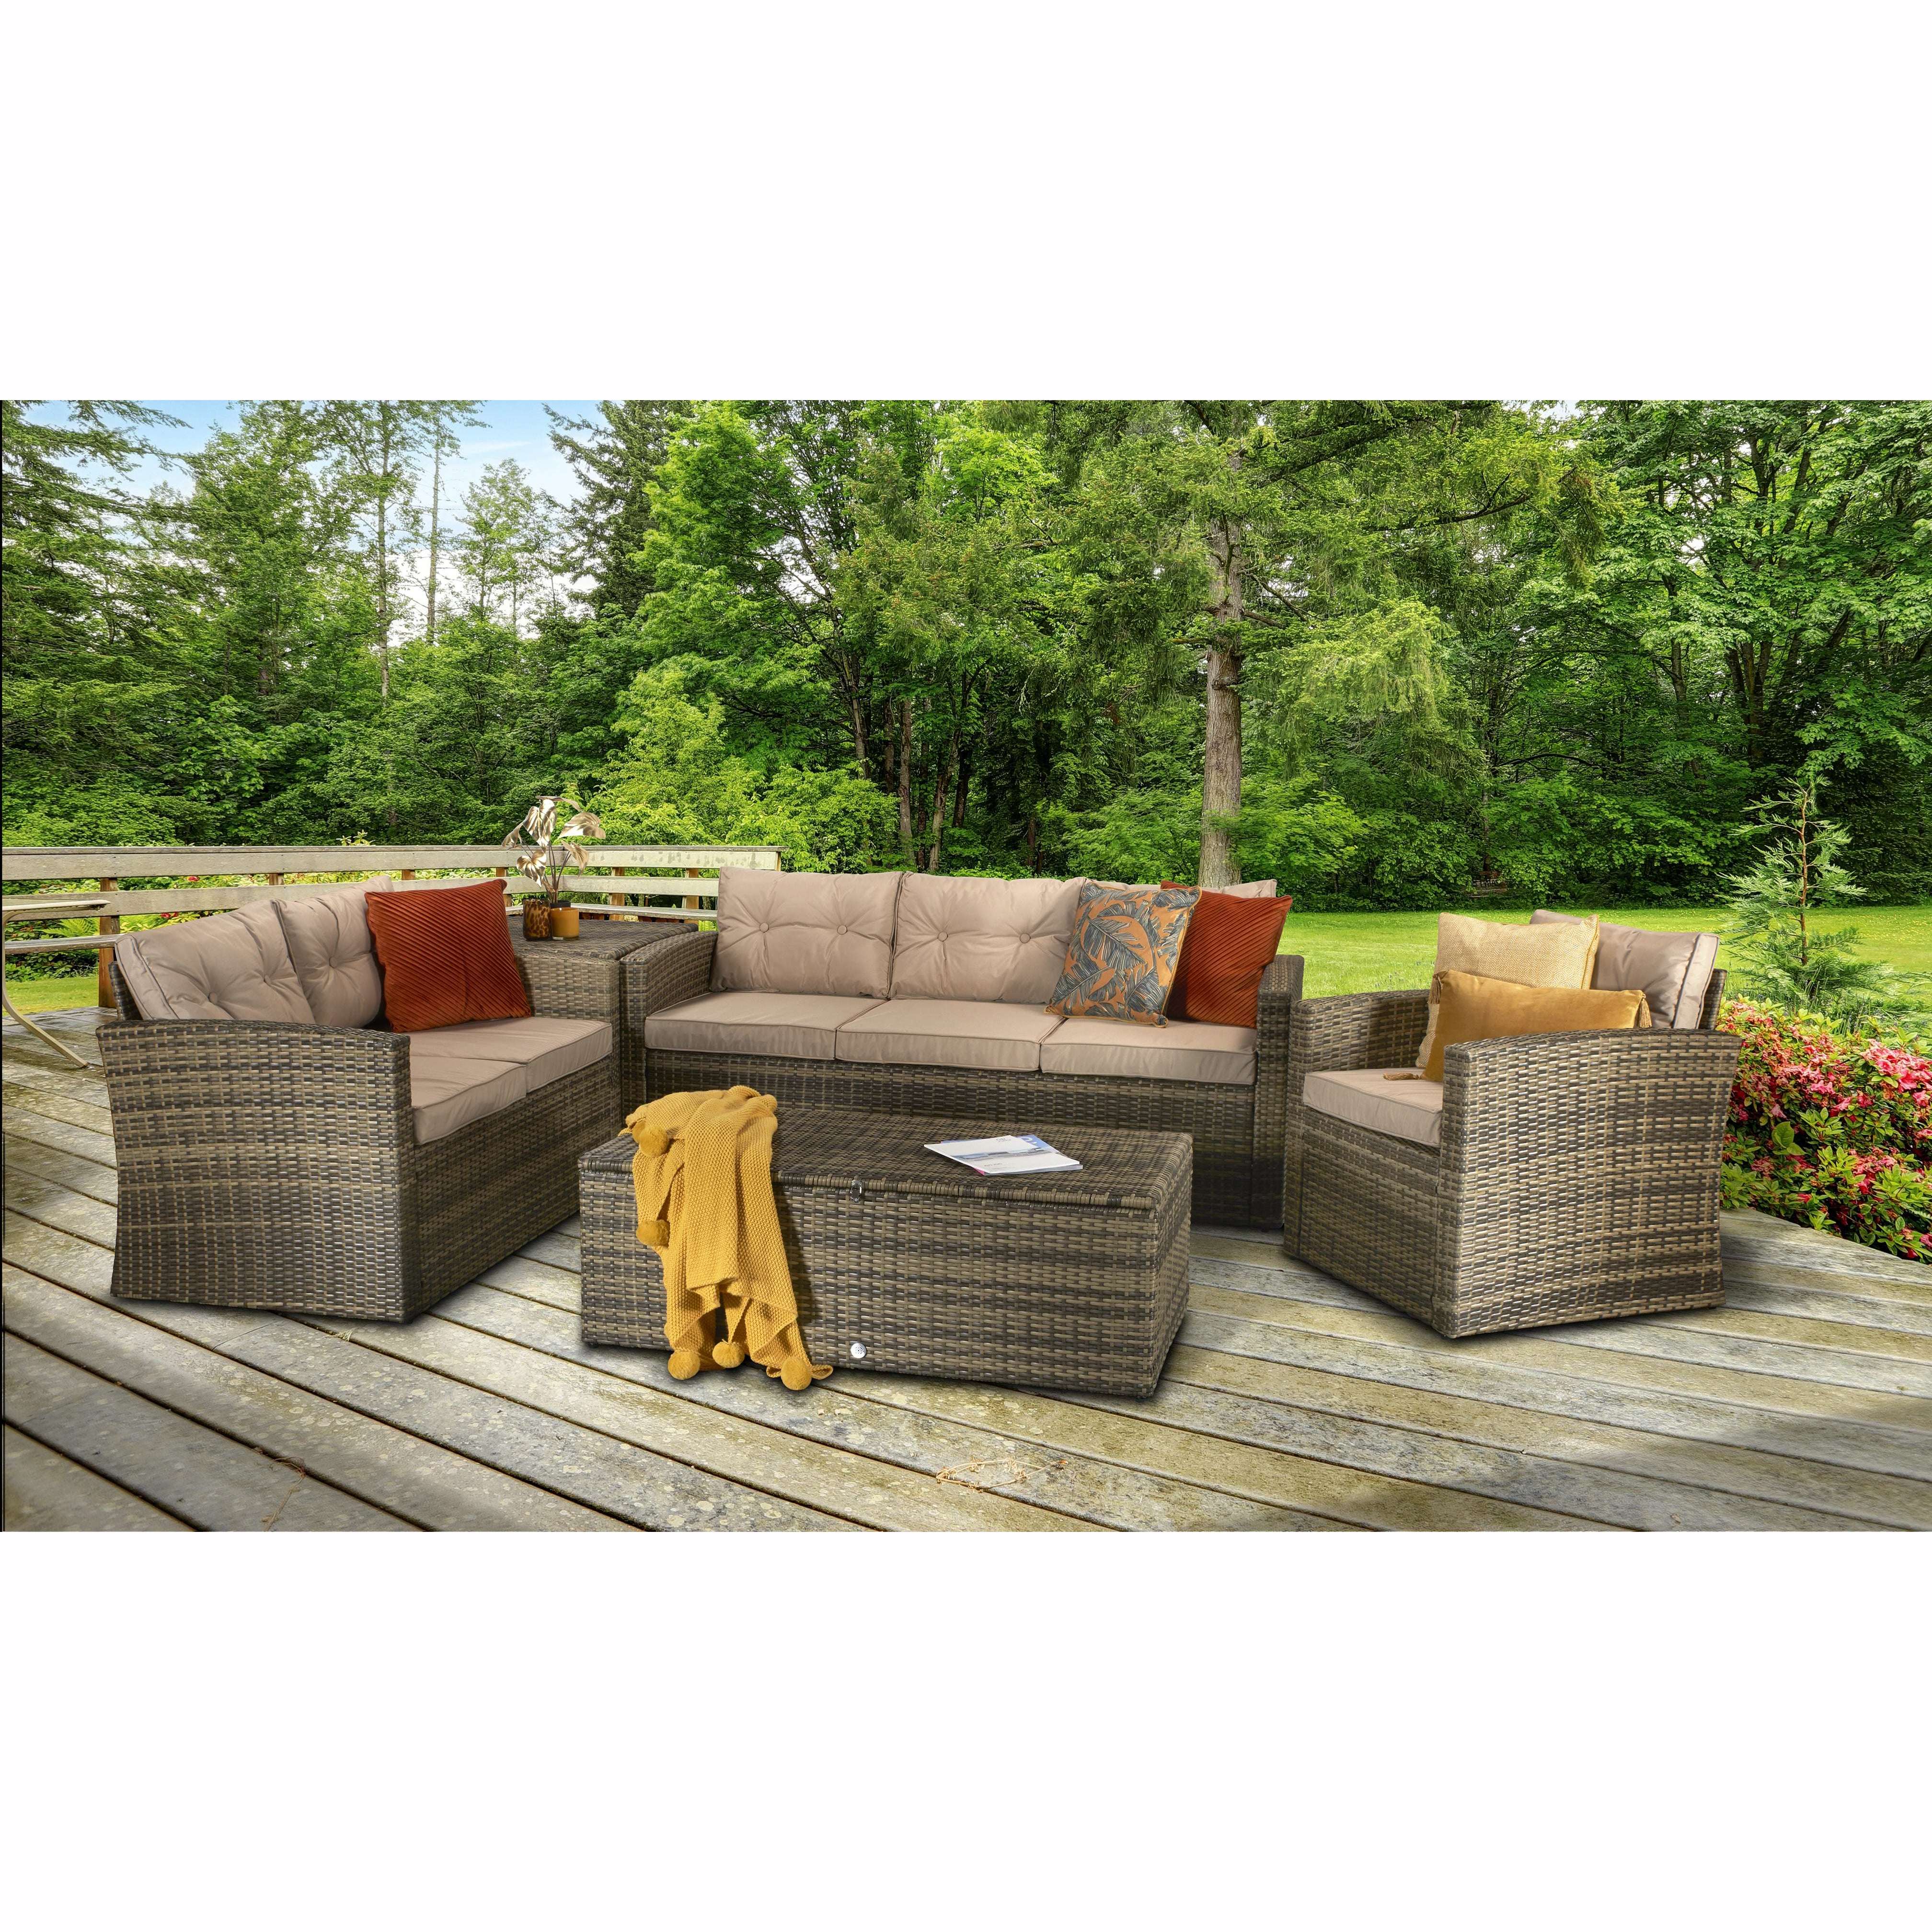 Exceptional Garden:Signature Weave Holly Sofa Set - Mixed Brown